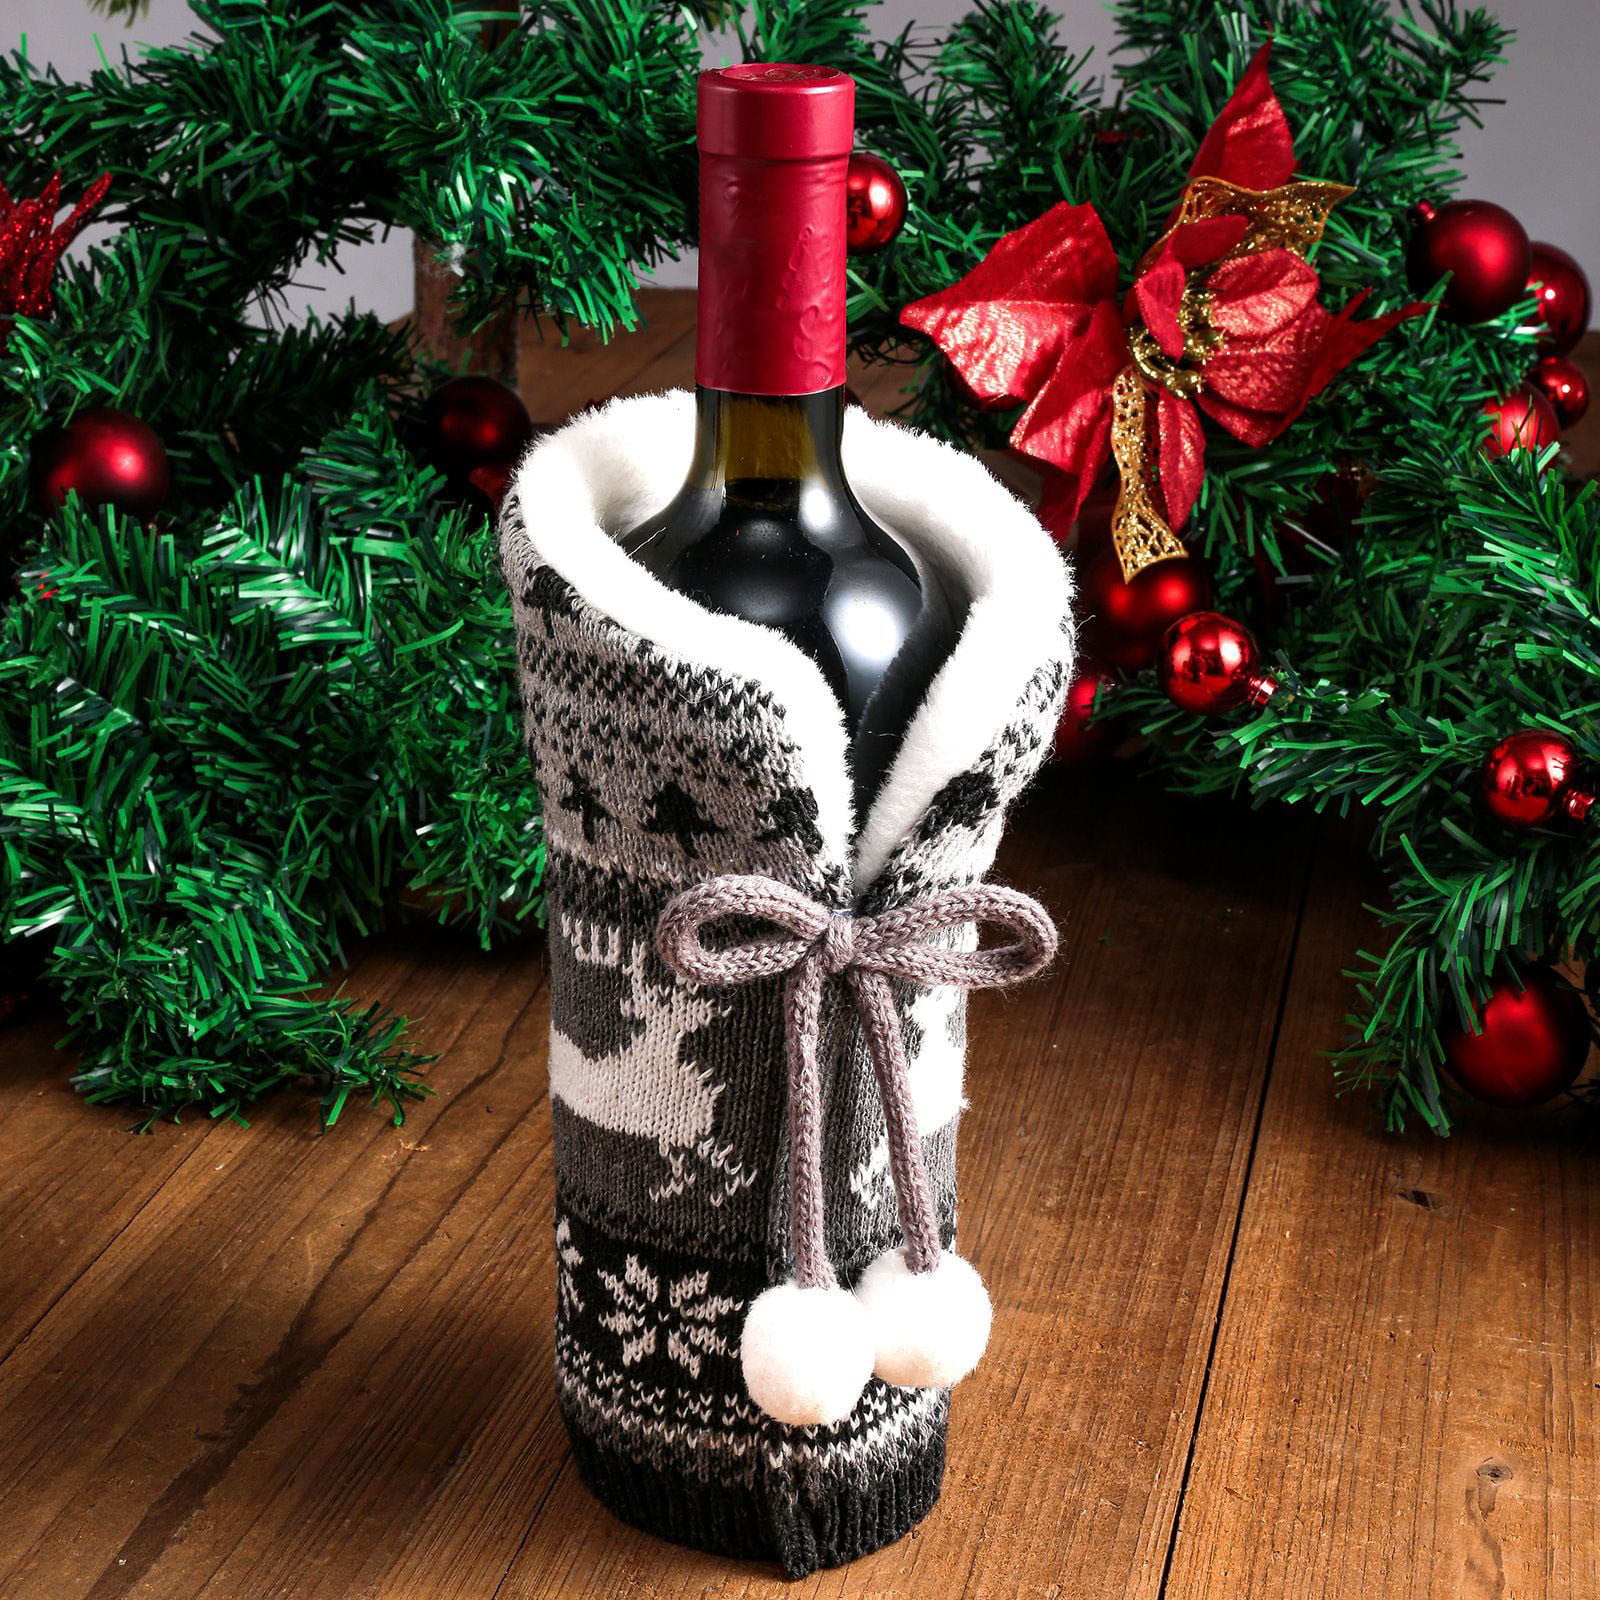 Christmas Red Wine Bottle Cover Bags Snowman Santa Claus Table Party Xmas Decors 